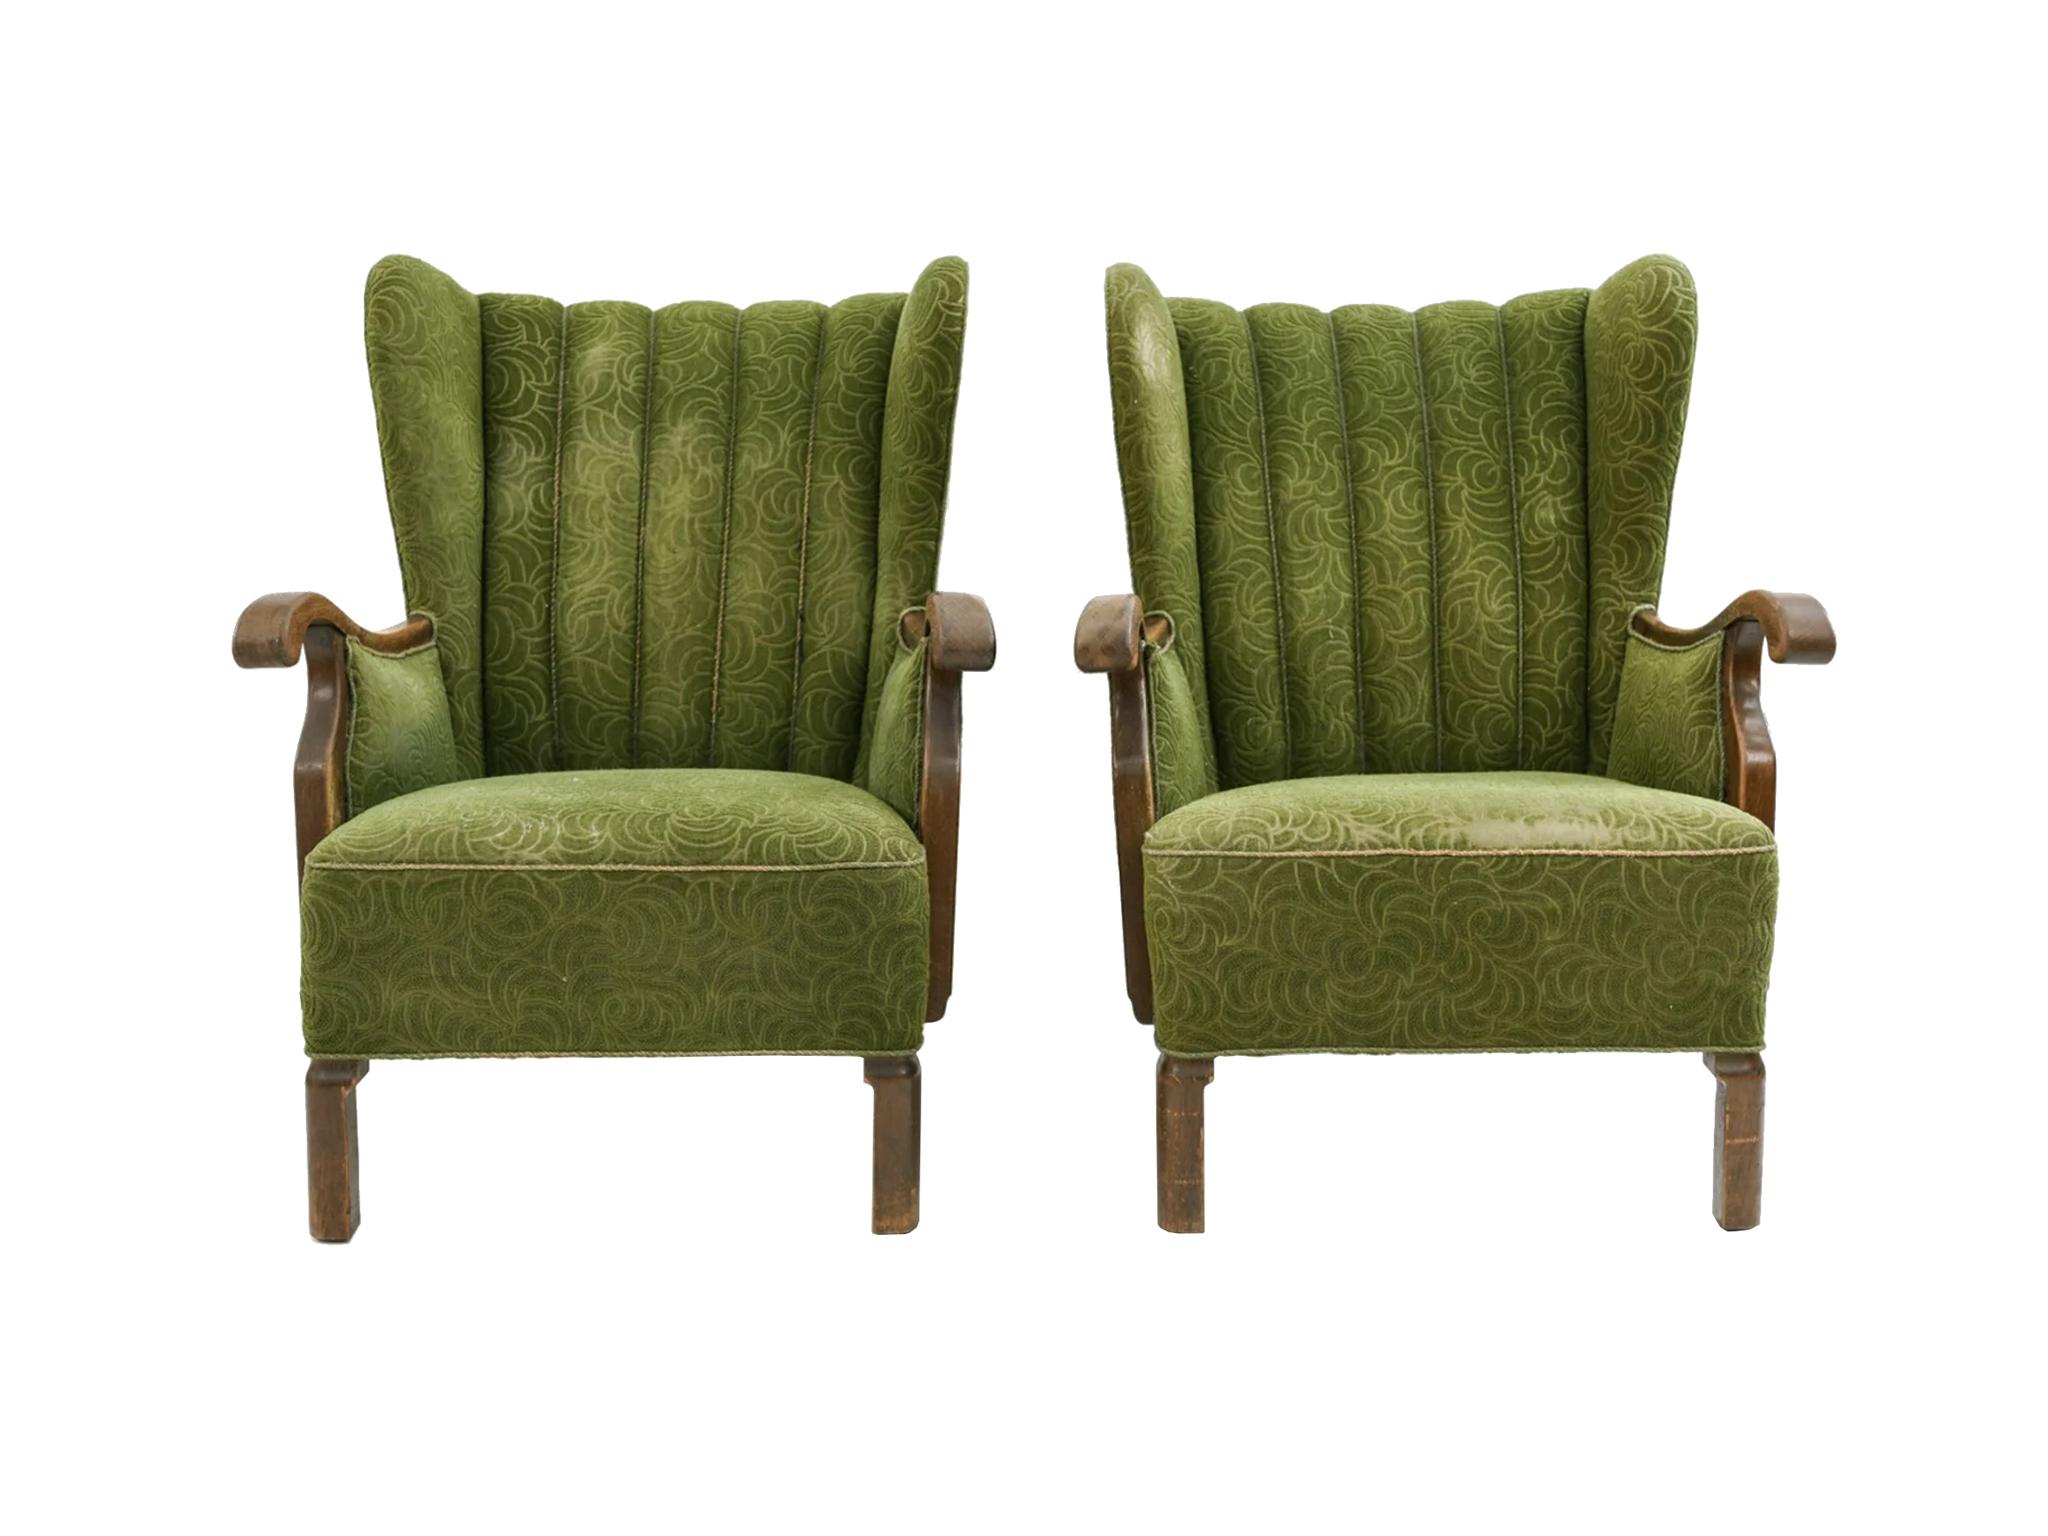 These Danish armchairs were designed by Viggo Boesen and made by Slagelse Møbelværk in the 1940s. Original green, embossed pattern fabric. The chairs are designed with an elegant scallop back, curved wood arms, and splayed back